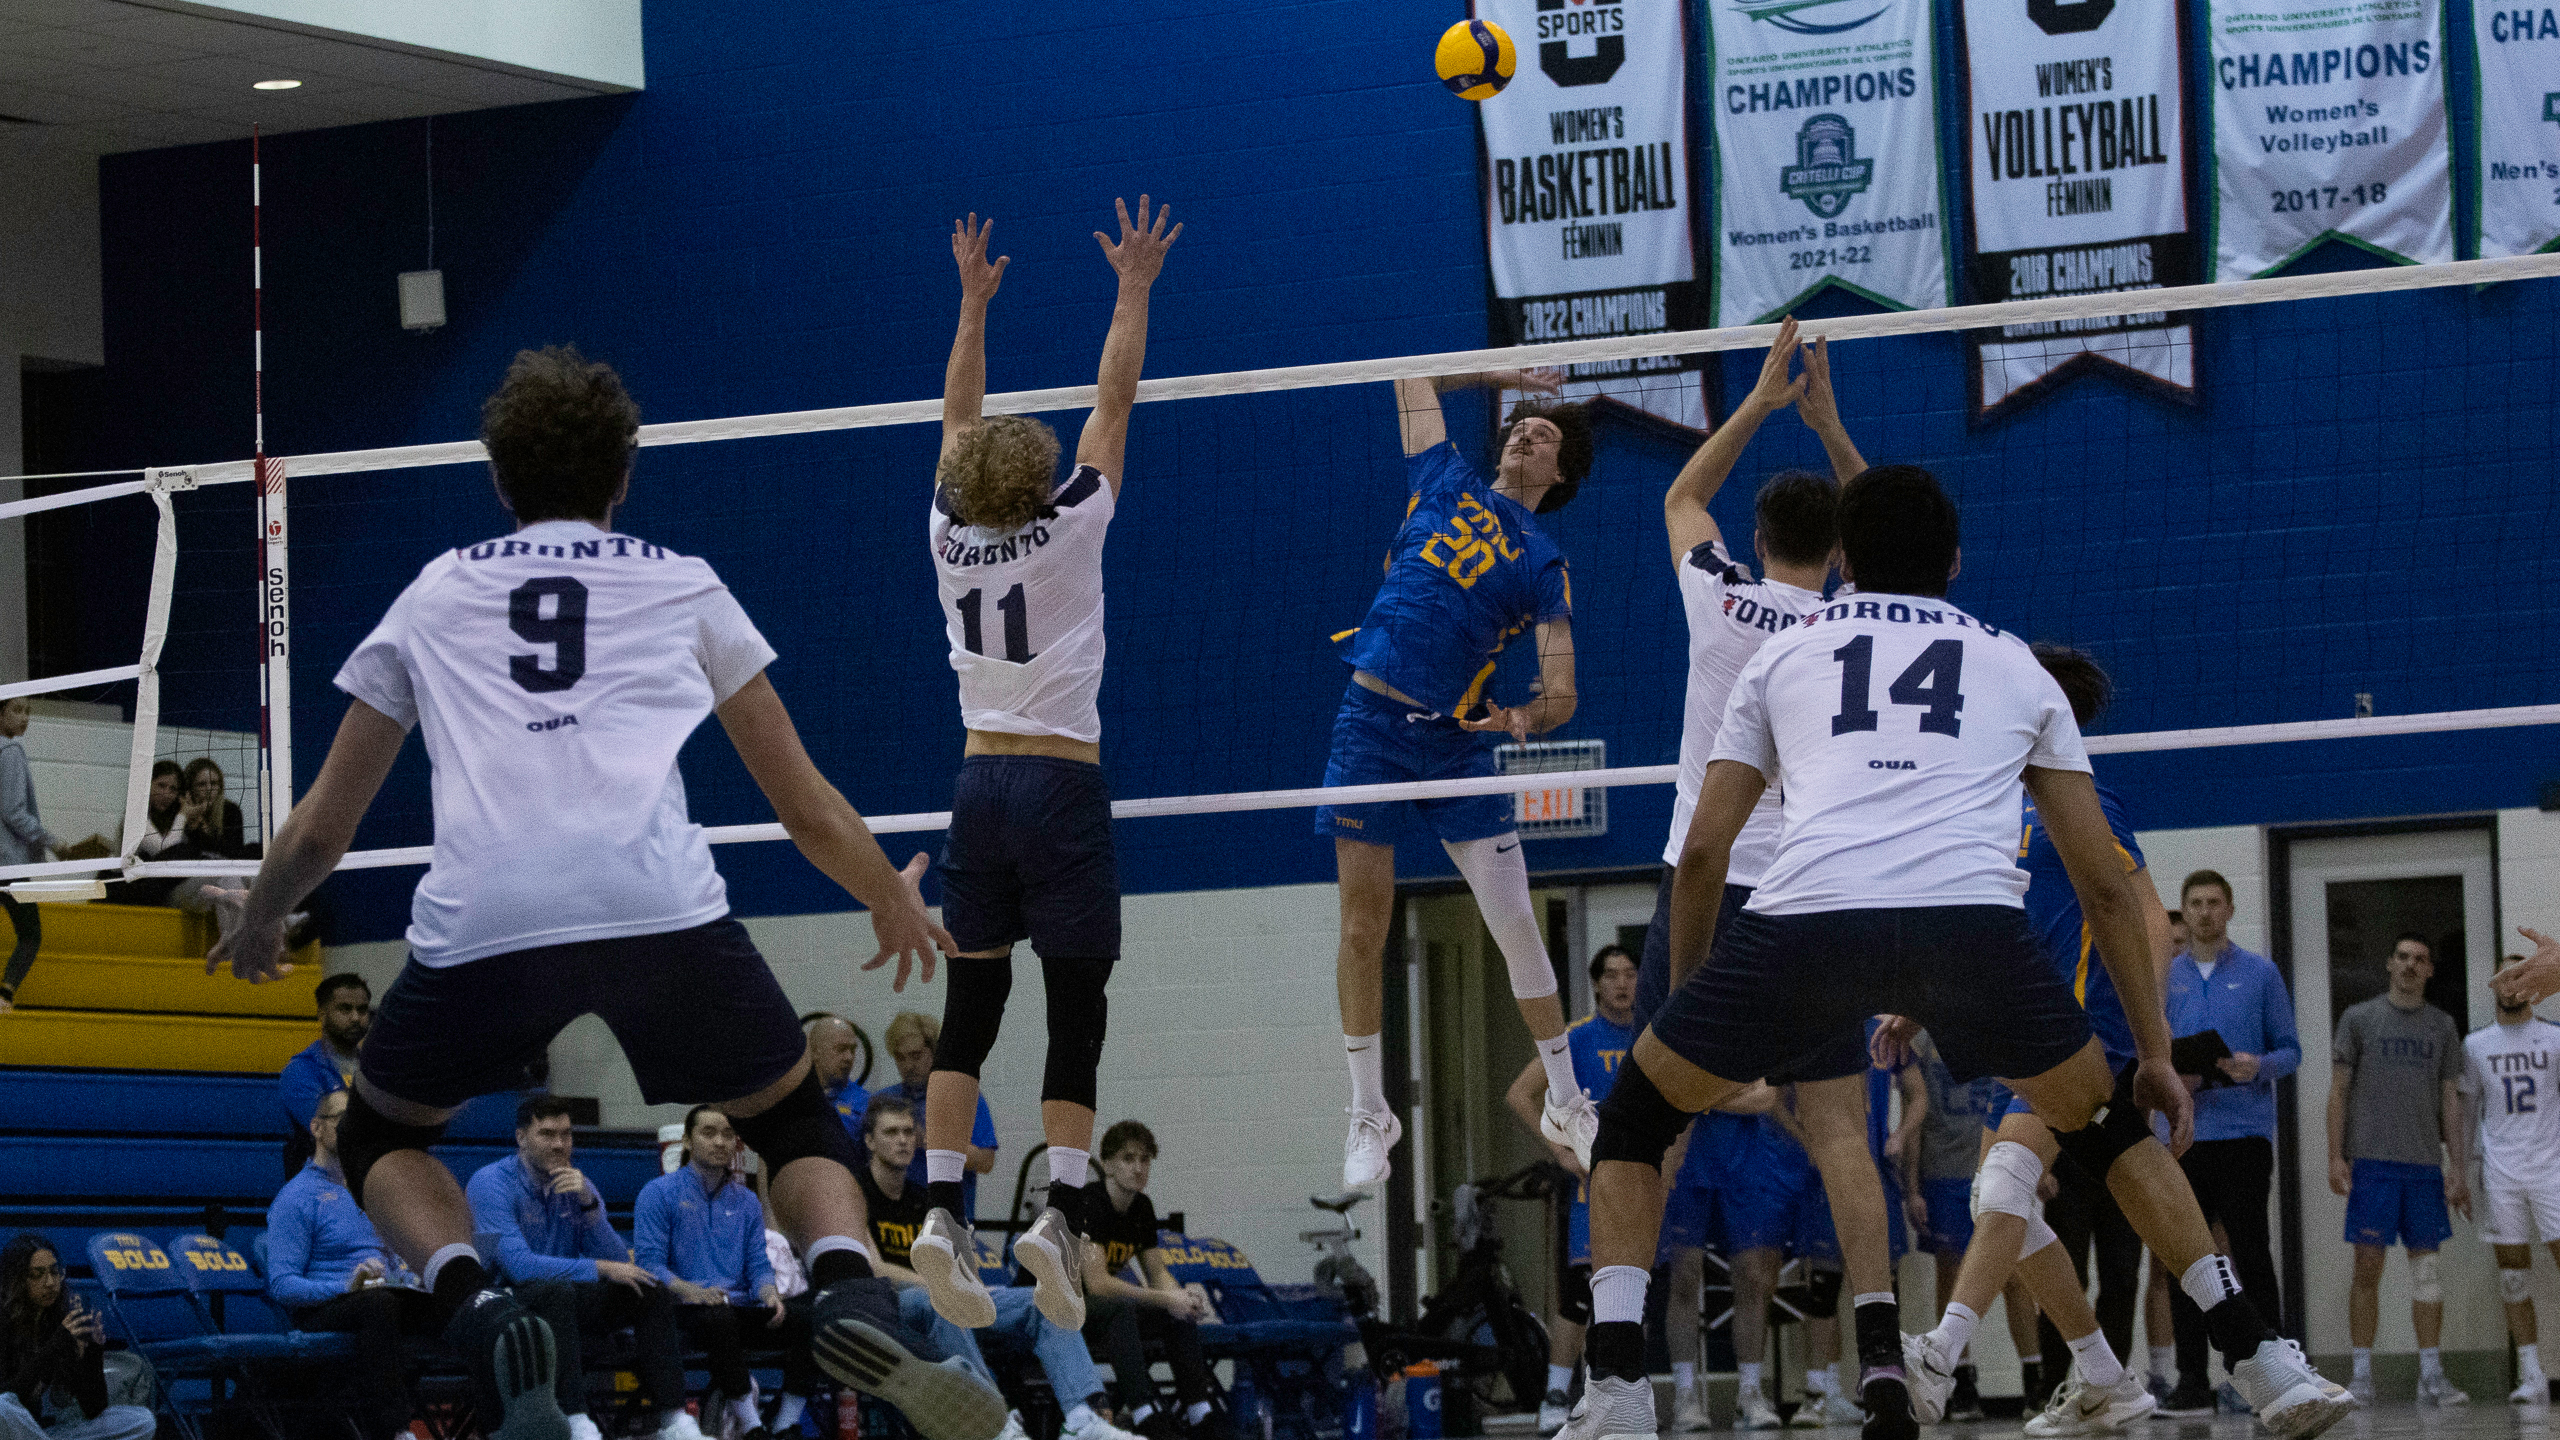 TMU Bold men's volleyball player Alex King spikes the ball